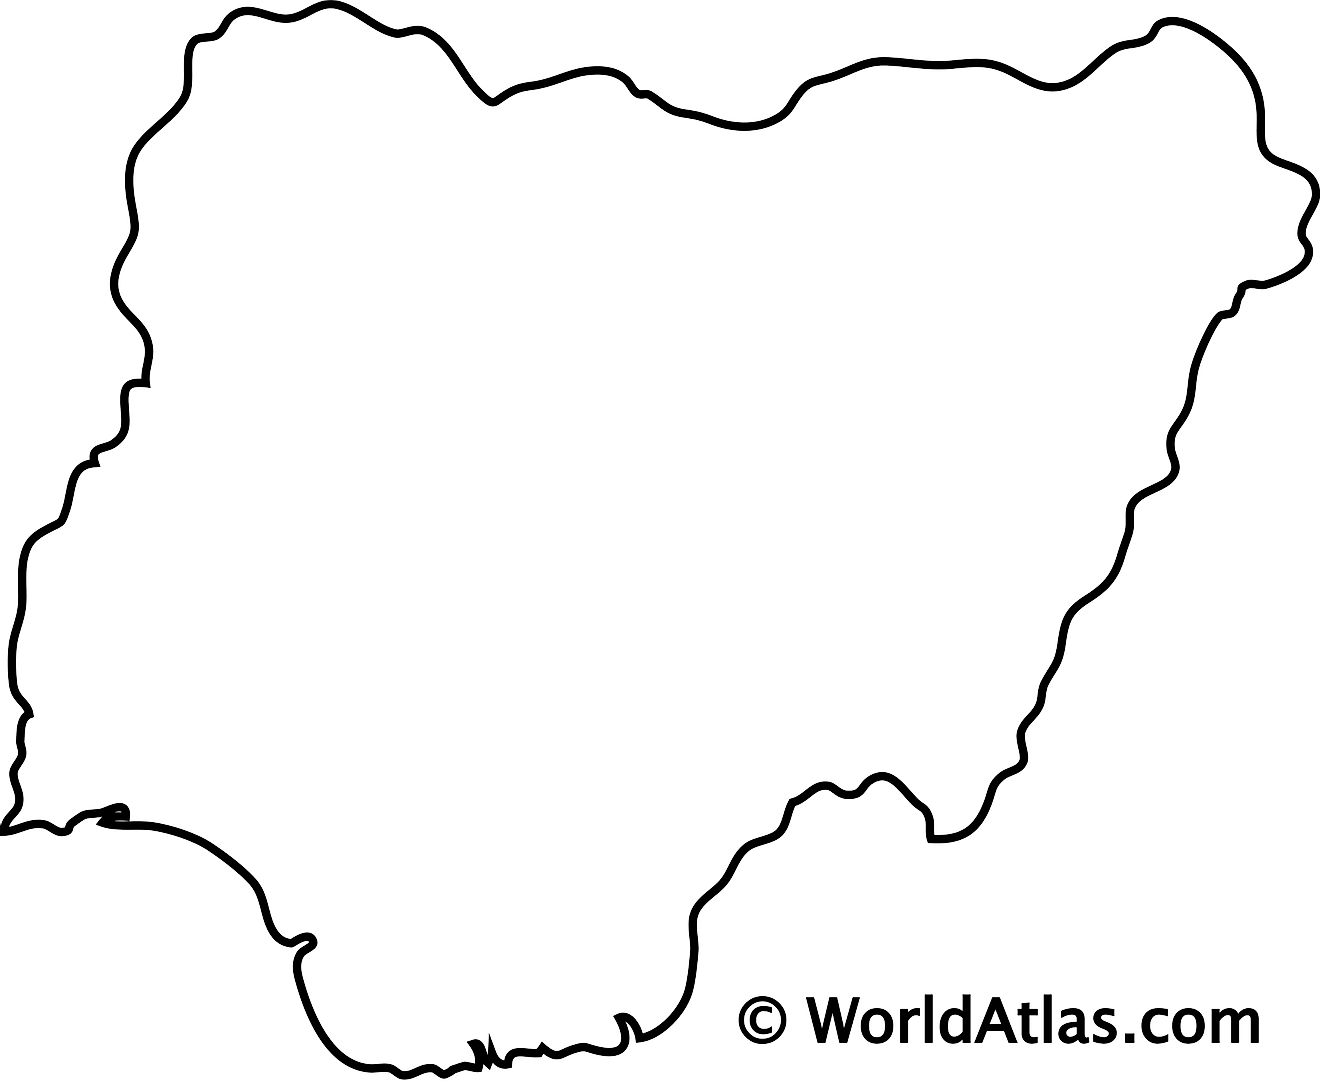 Blank Outline Map of Nigeria